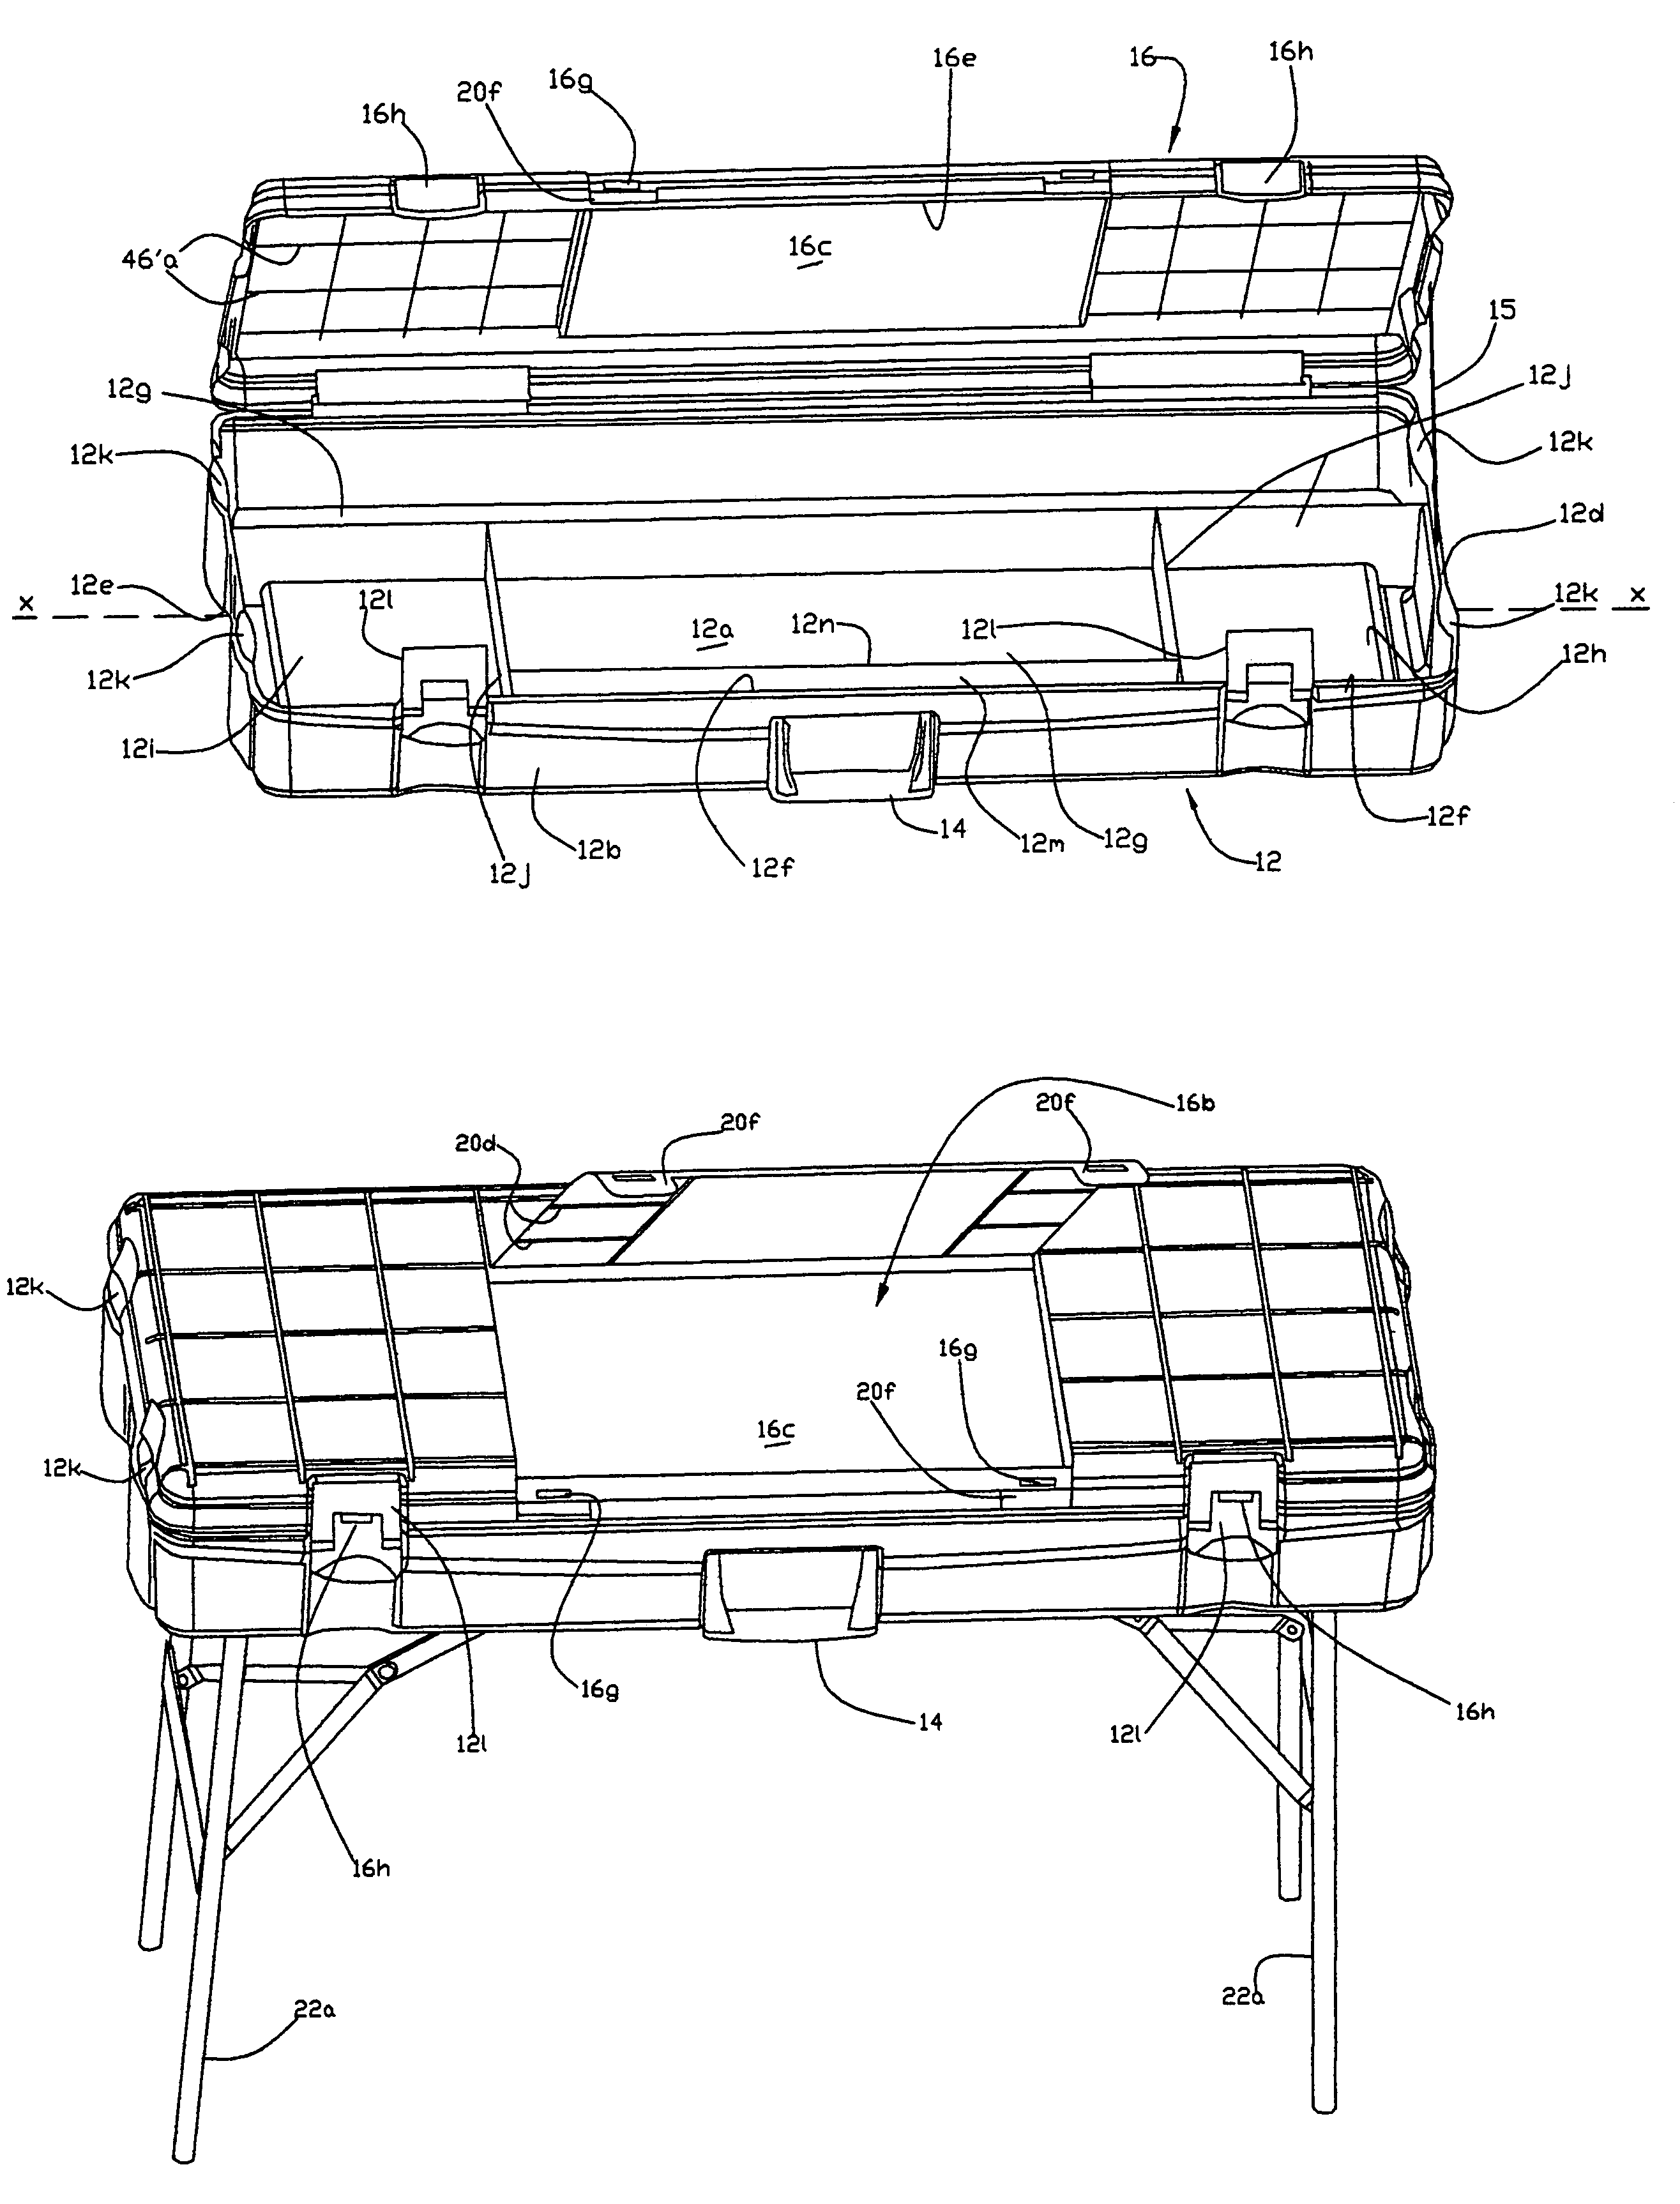 Portable gift wrapping center for storing wrapping and stationary supplies and facilitating the use thereof